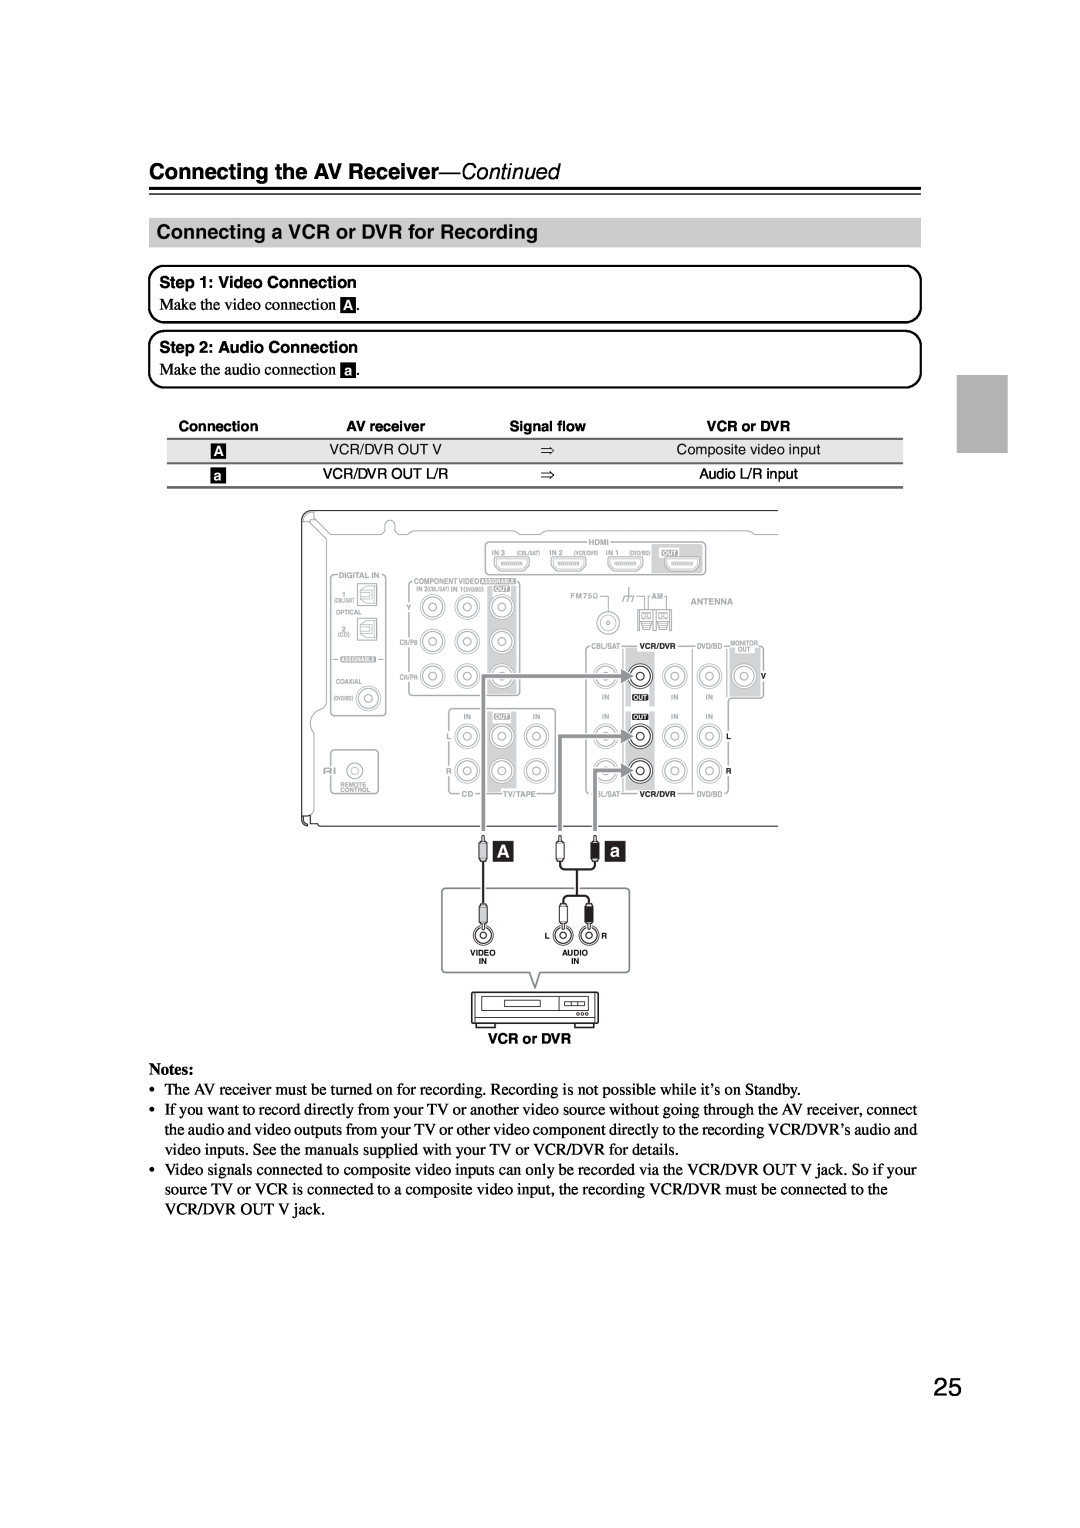 Onkyo TXSR307 instruction manual Connecting a VCR or DVR for Recording, Connecting the AV Receiver-Continued 